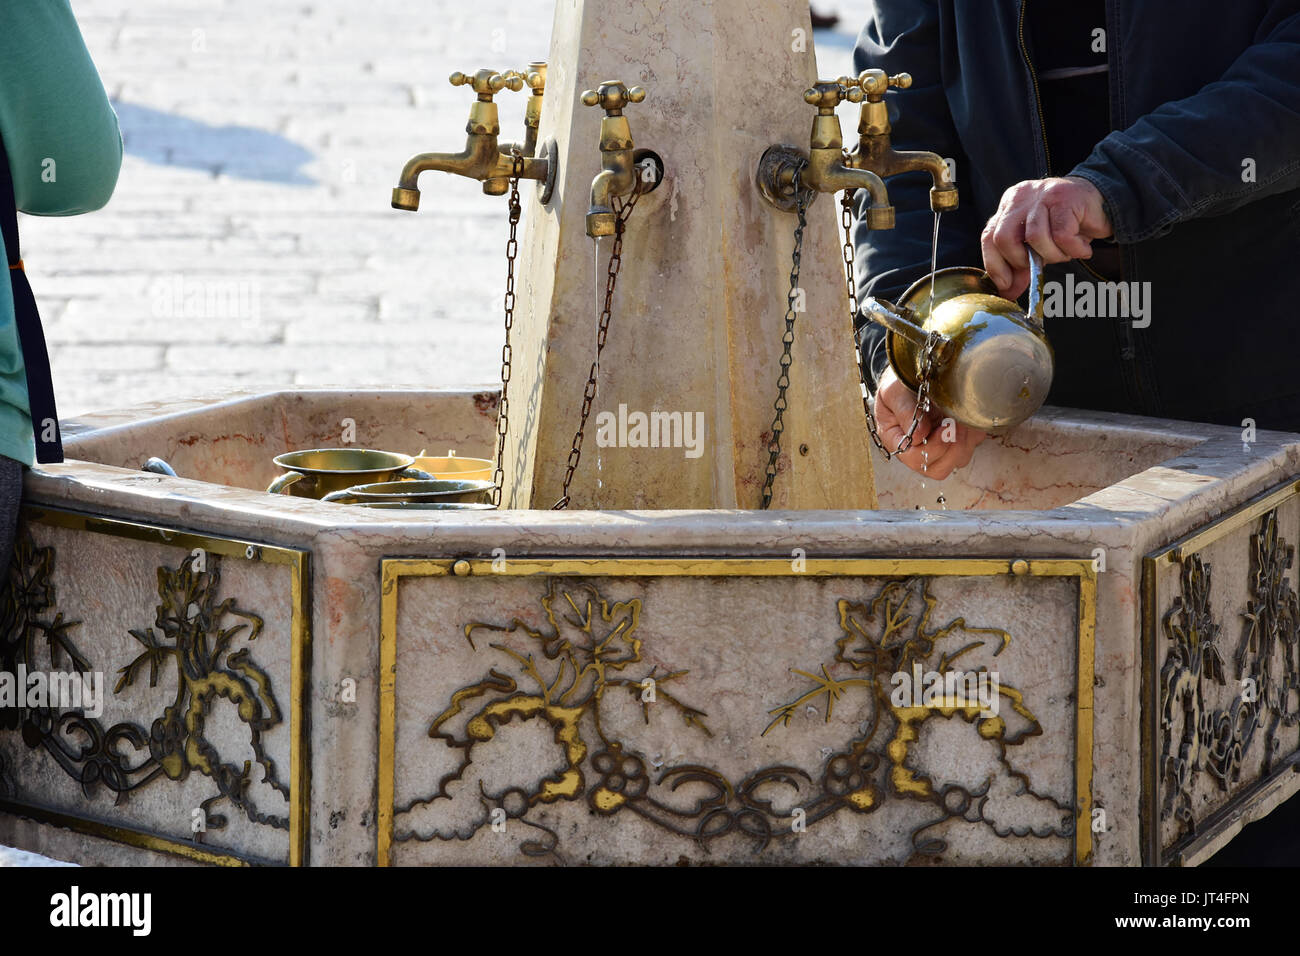 holy water station in israel Stock Photo